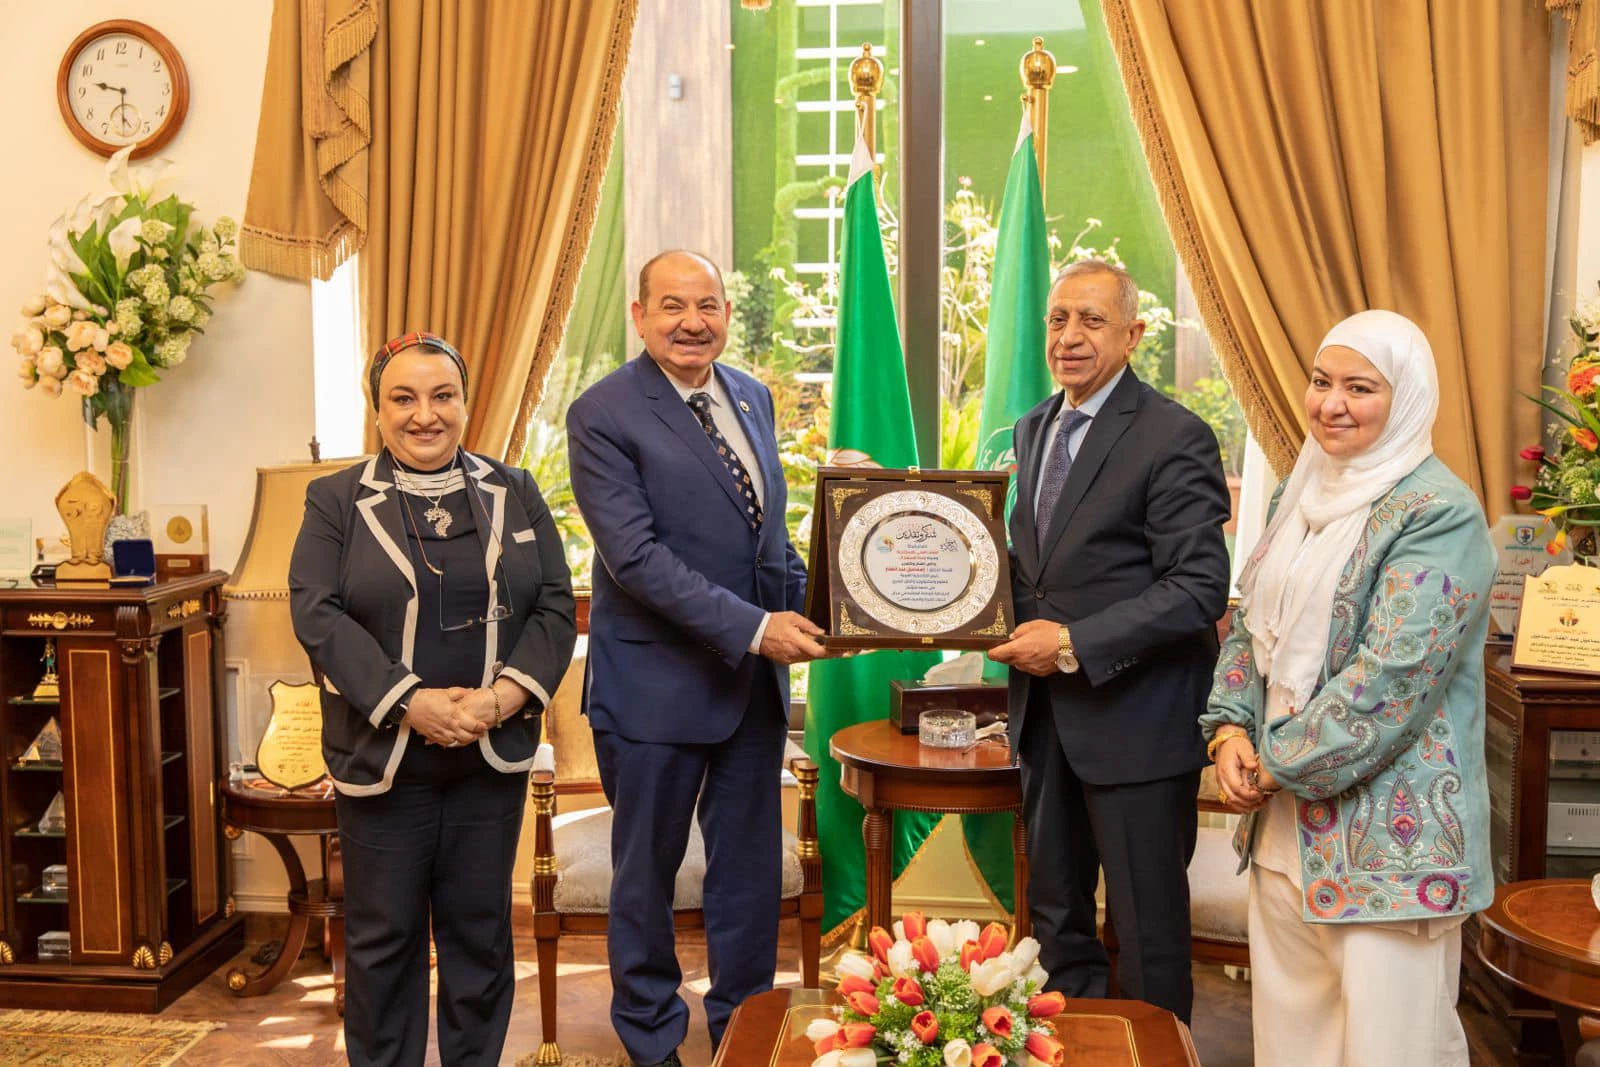 Honoring the President of the Academy for sponsoring the conference on the sustainability of the national industry in the field of water and sanitation services.2